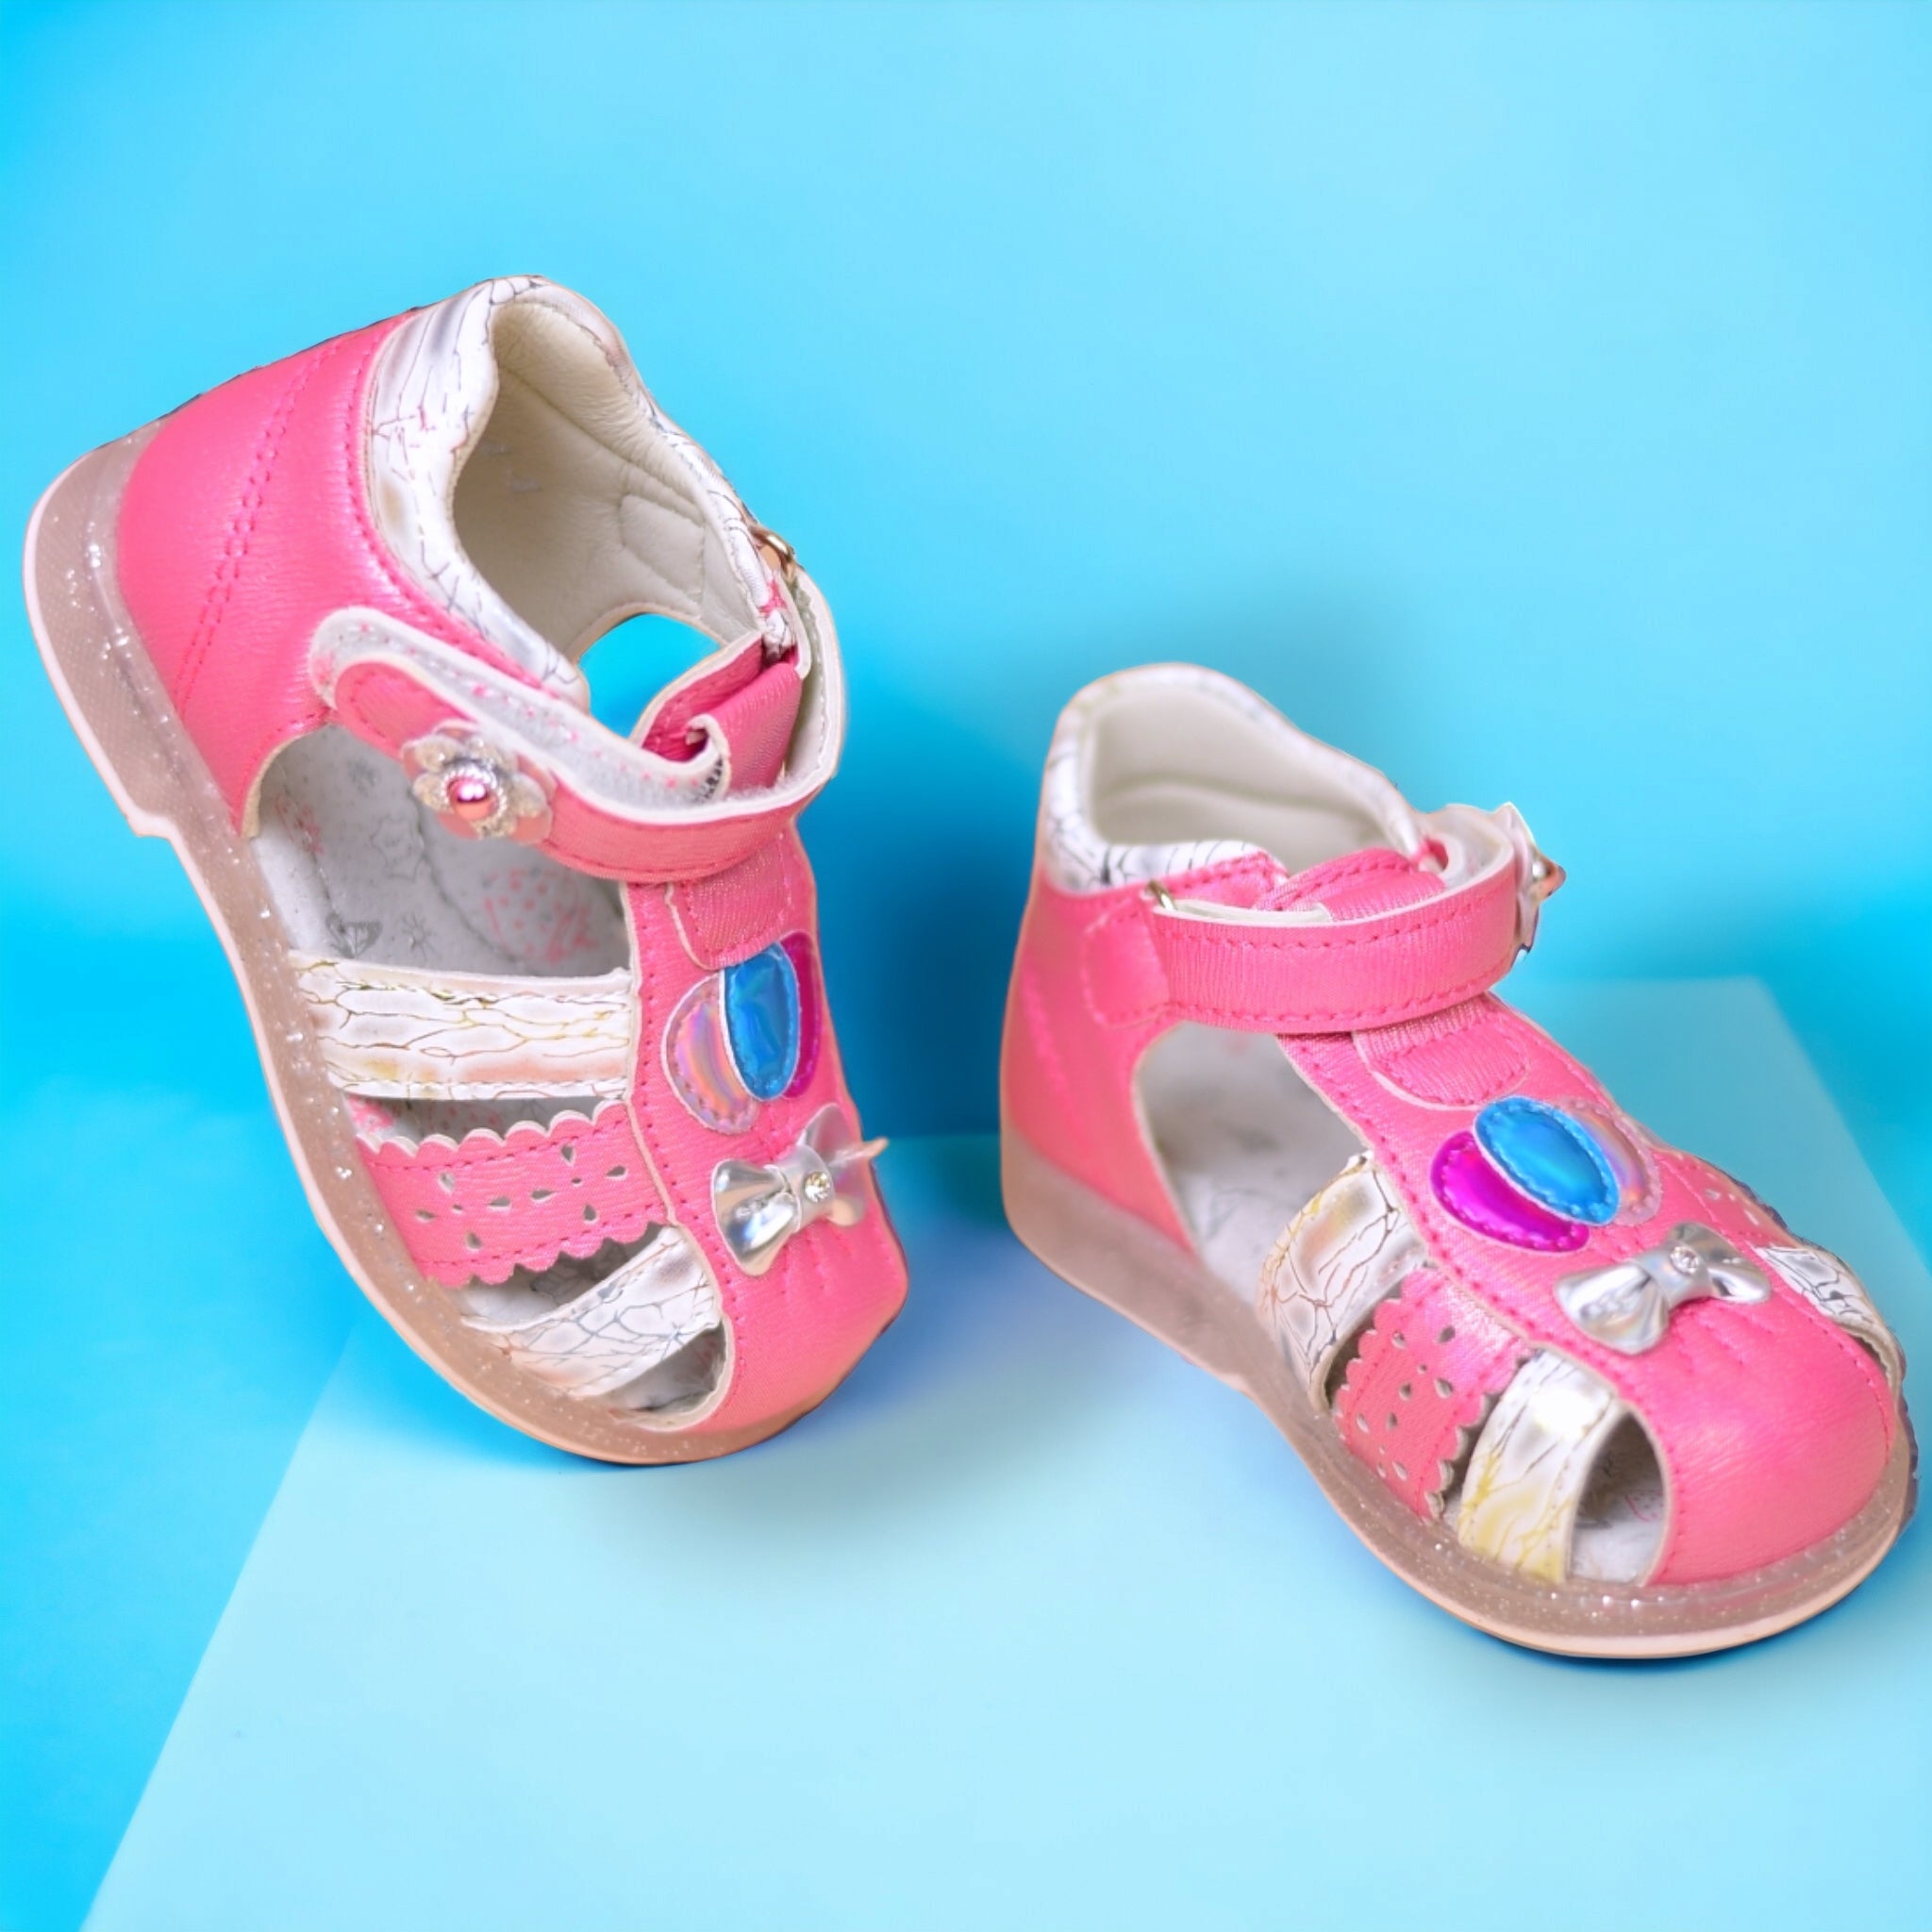 Kids Sandals Maurice Pink Made of Eco Leather and Natural Leather